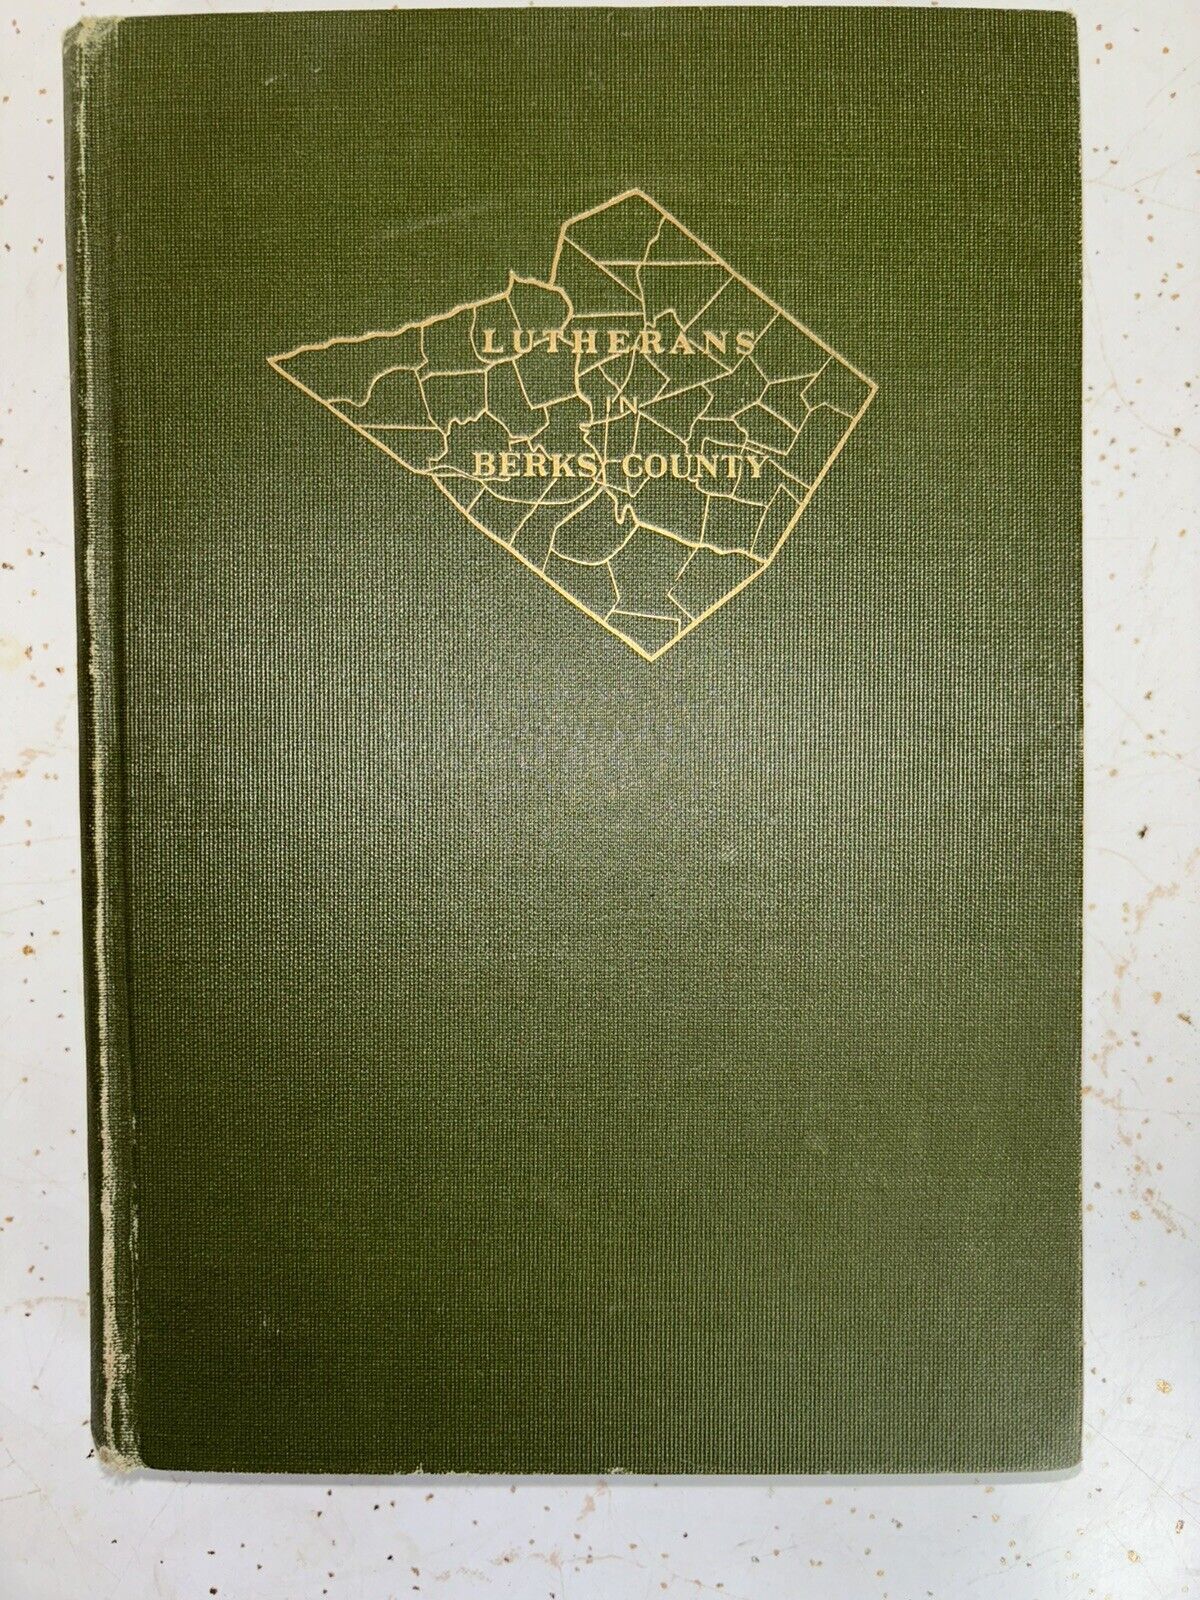 Antique 1923 Book 'Lutherans in Berks County' + Poetical History of Berks County